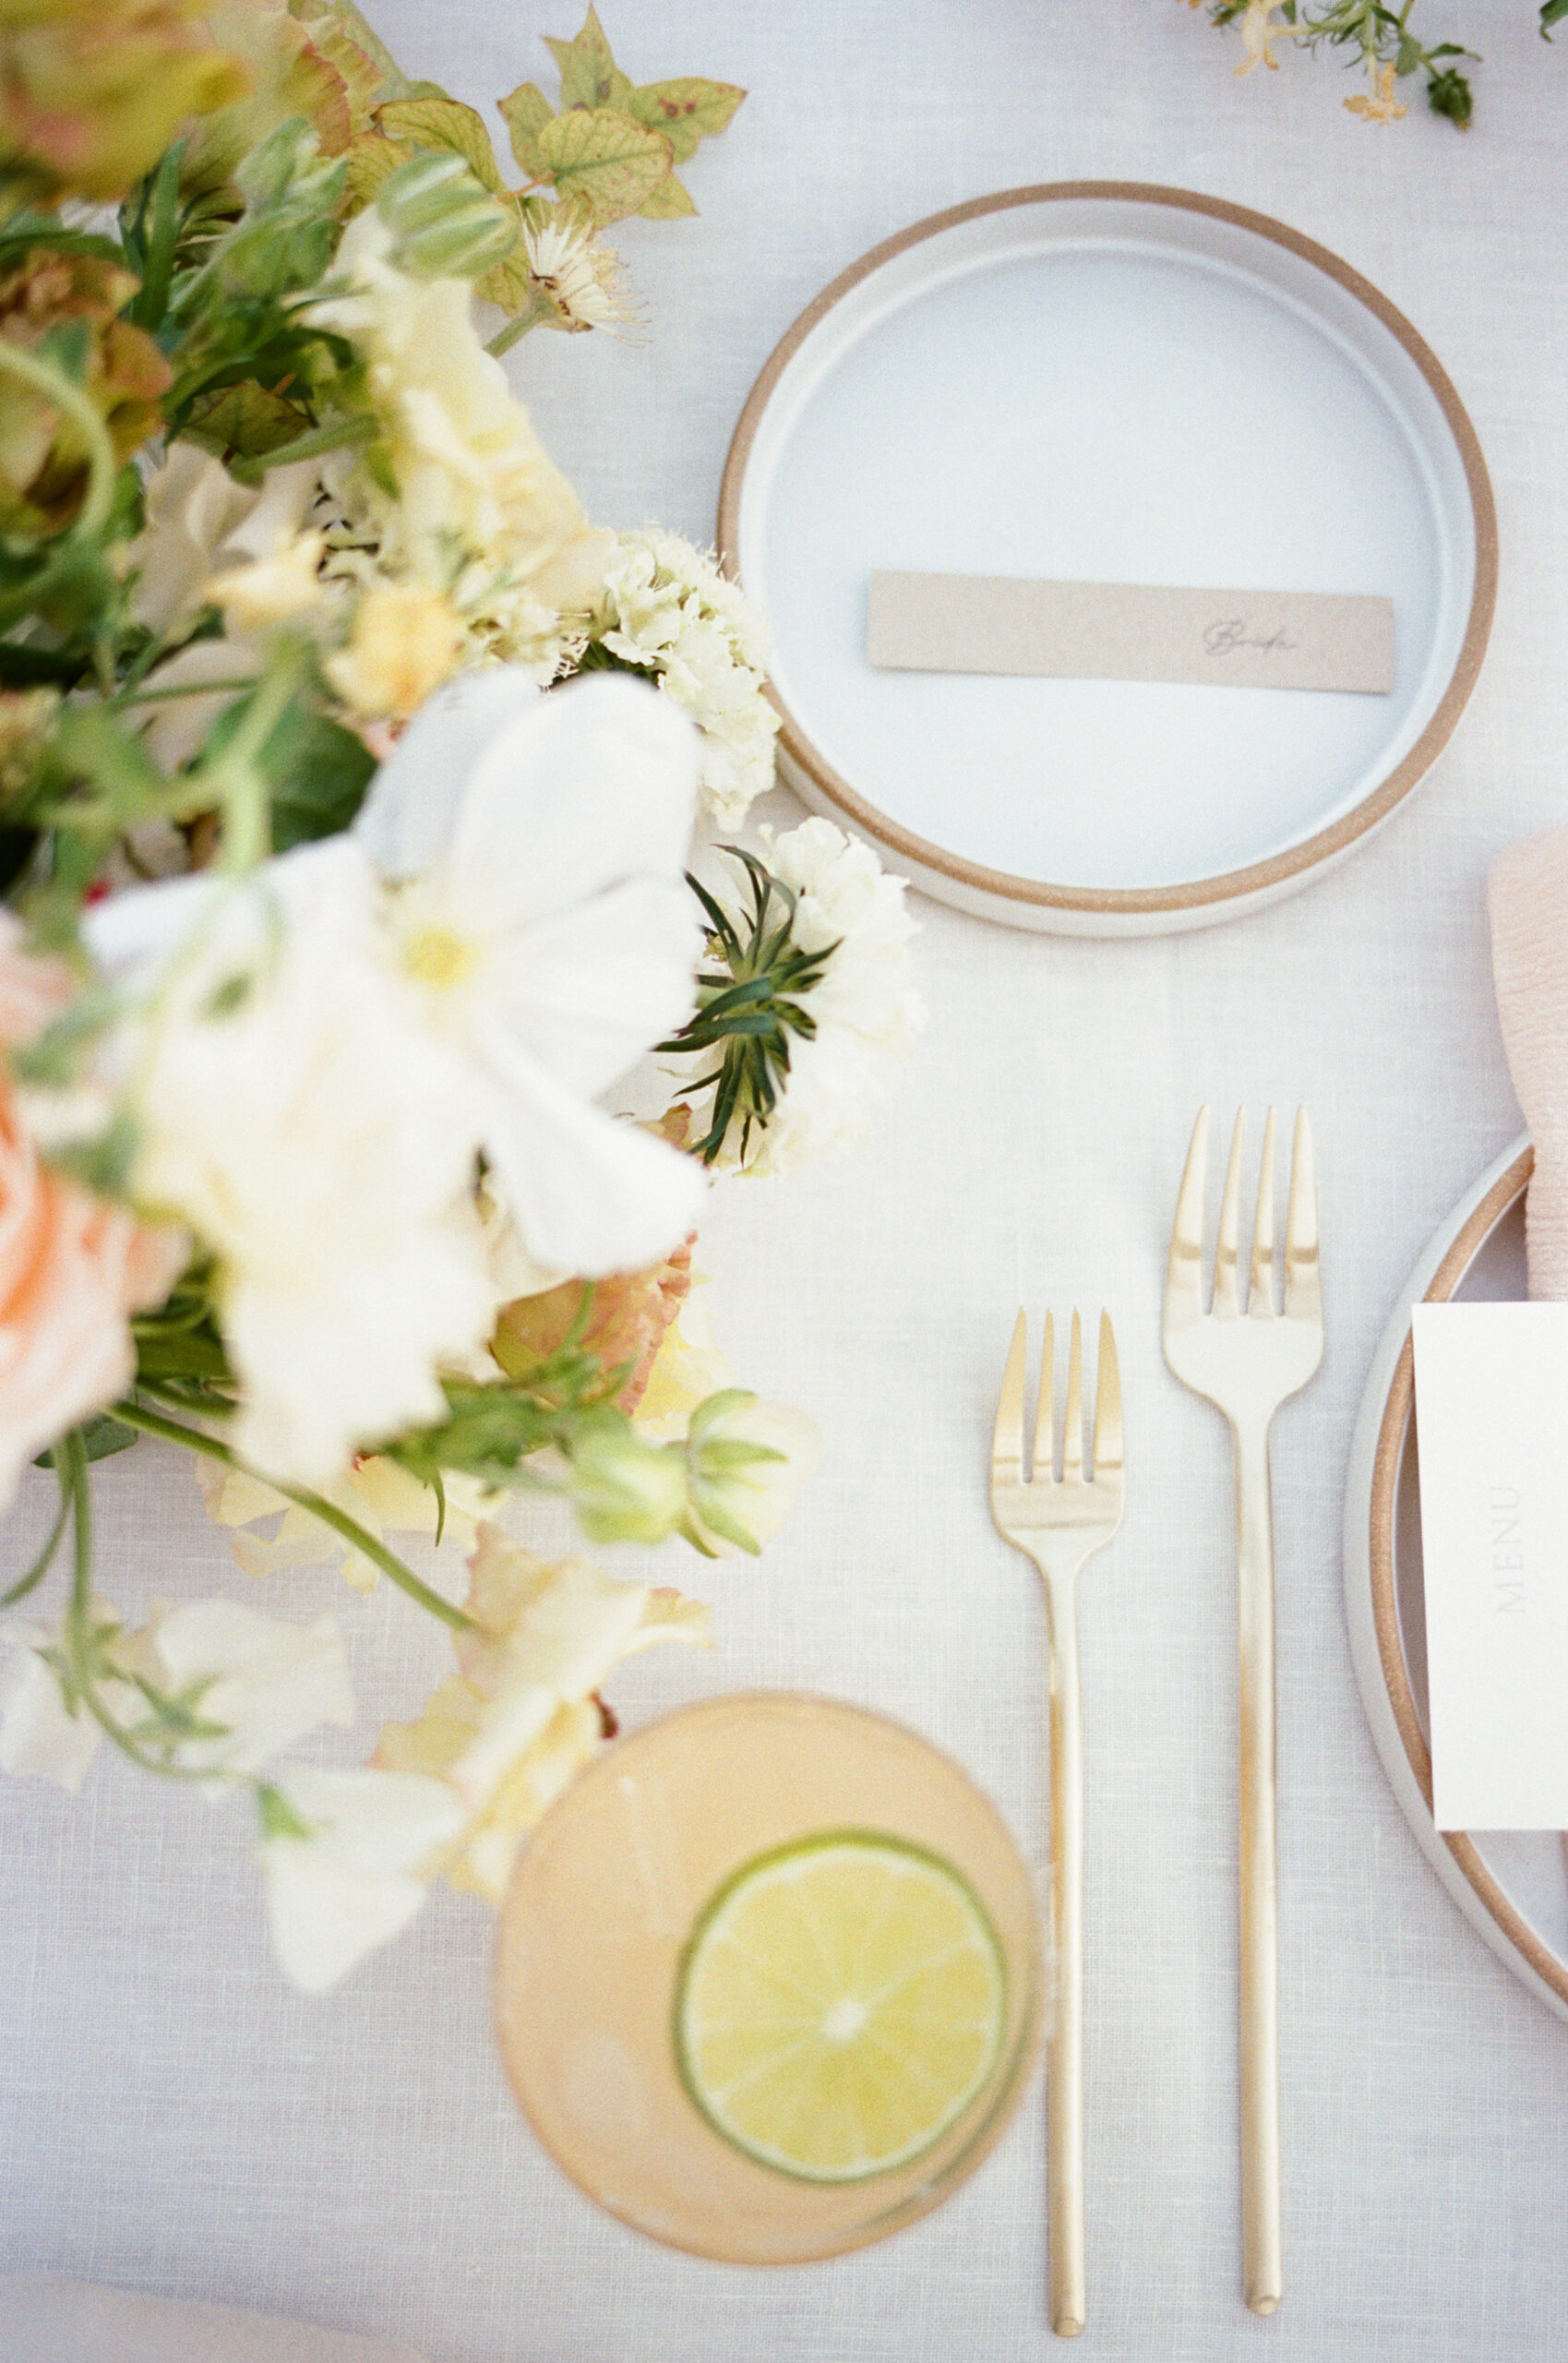 table top with floral arrangement, peach coloured cocktail with lime floating inside, and white plates with gold cutlery next to them